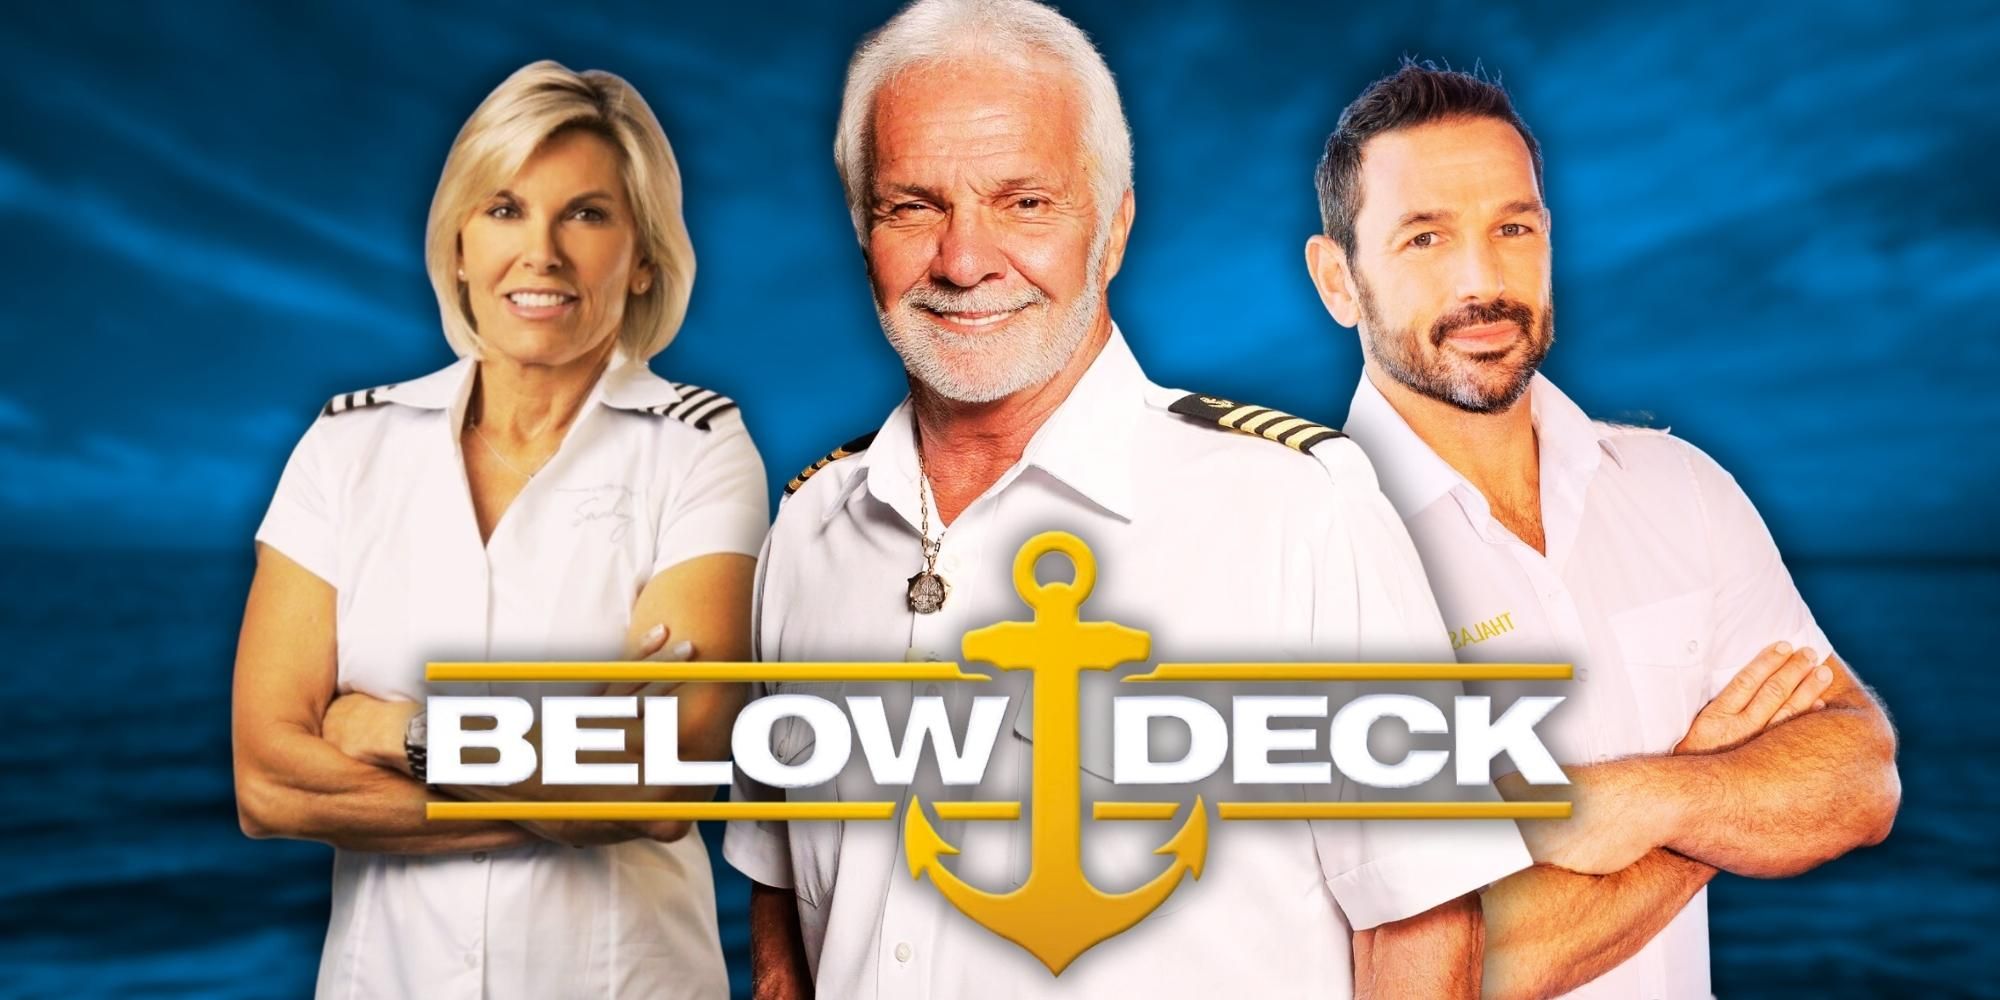 Sandy, Lee, and Jason from Below Deck franchise